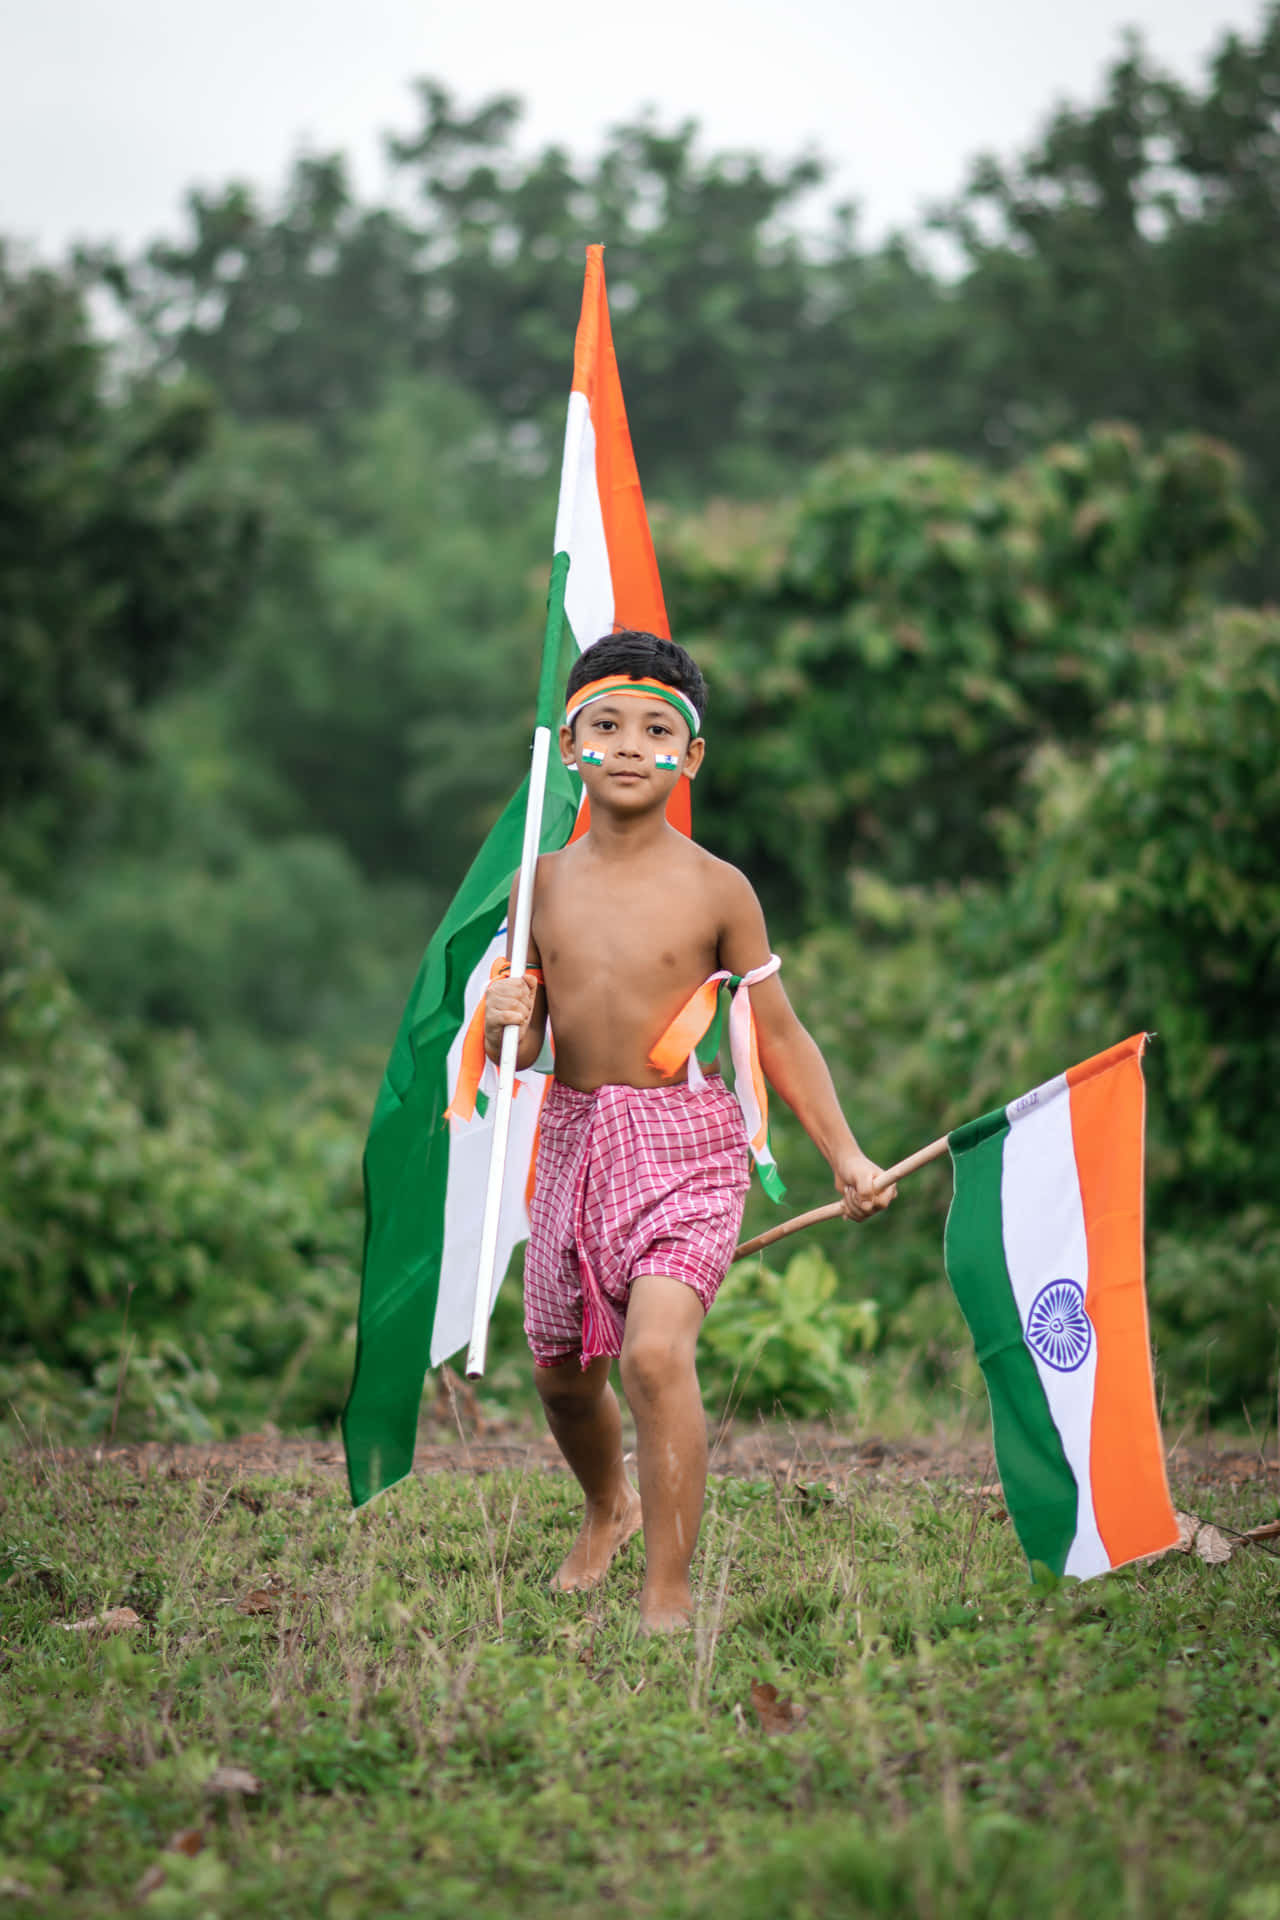 Shirtless Indian Boy Holding Flags Picture